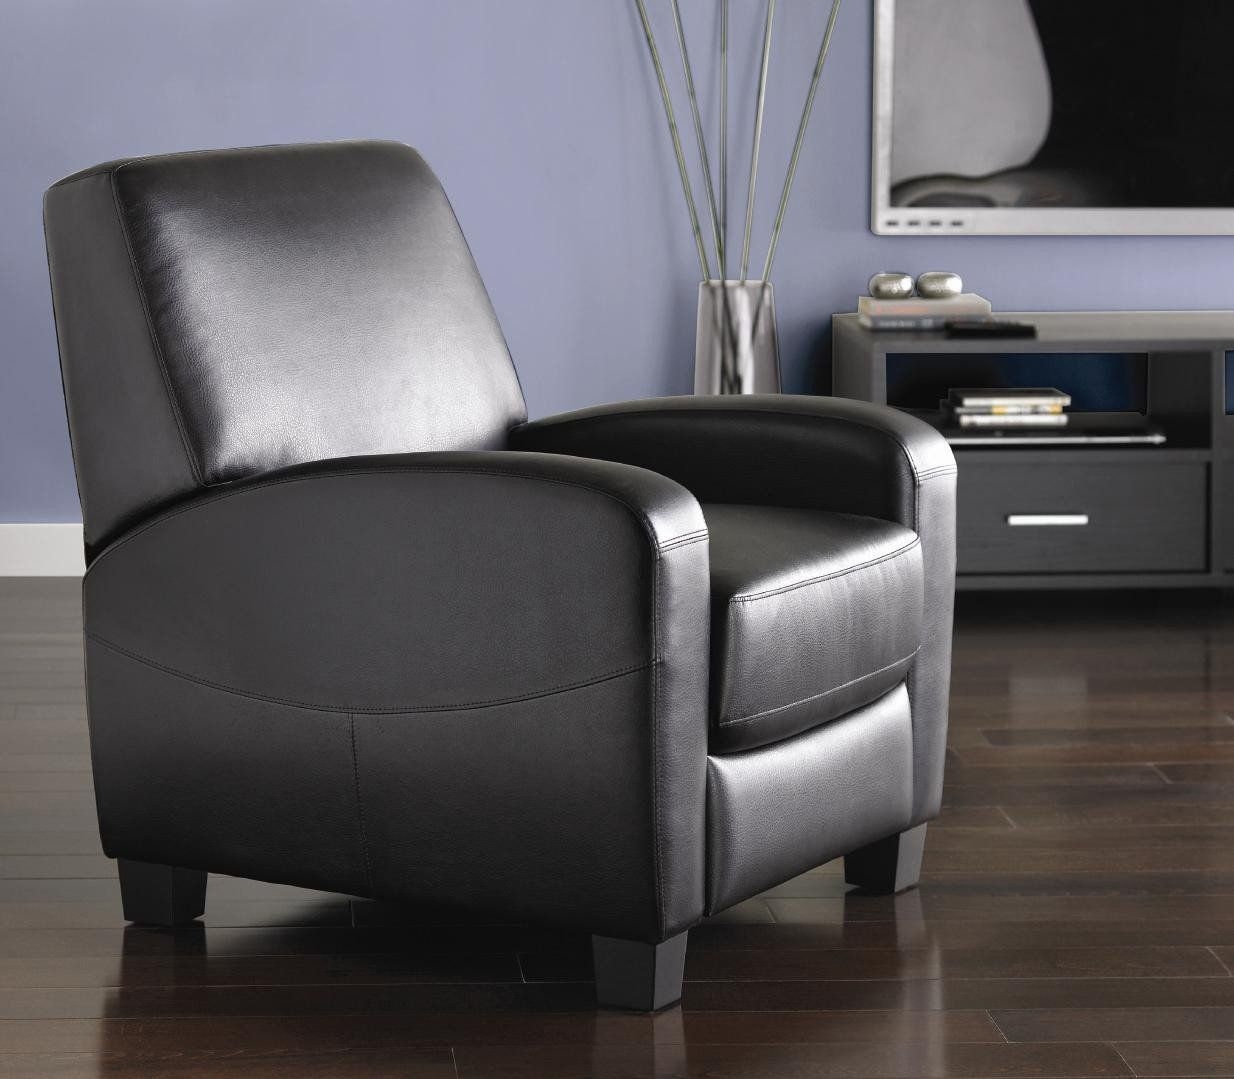 Home theater chairs 6